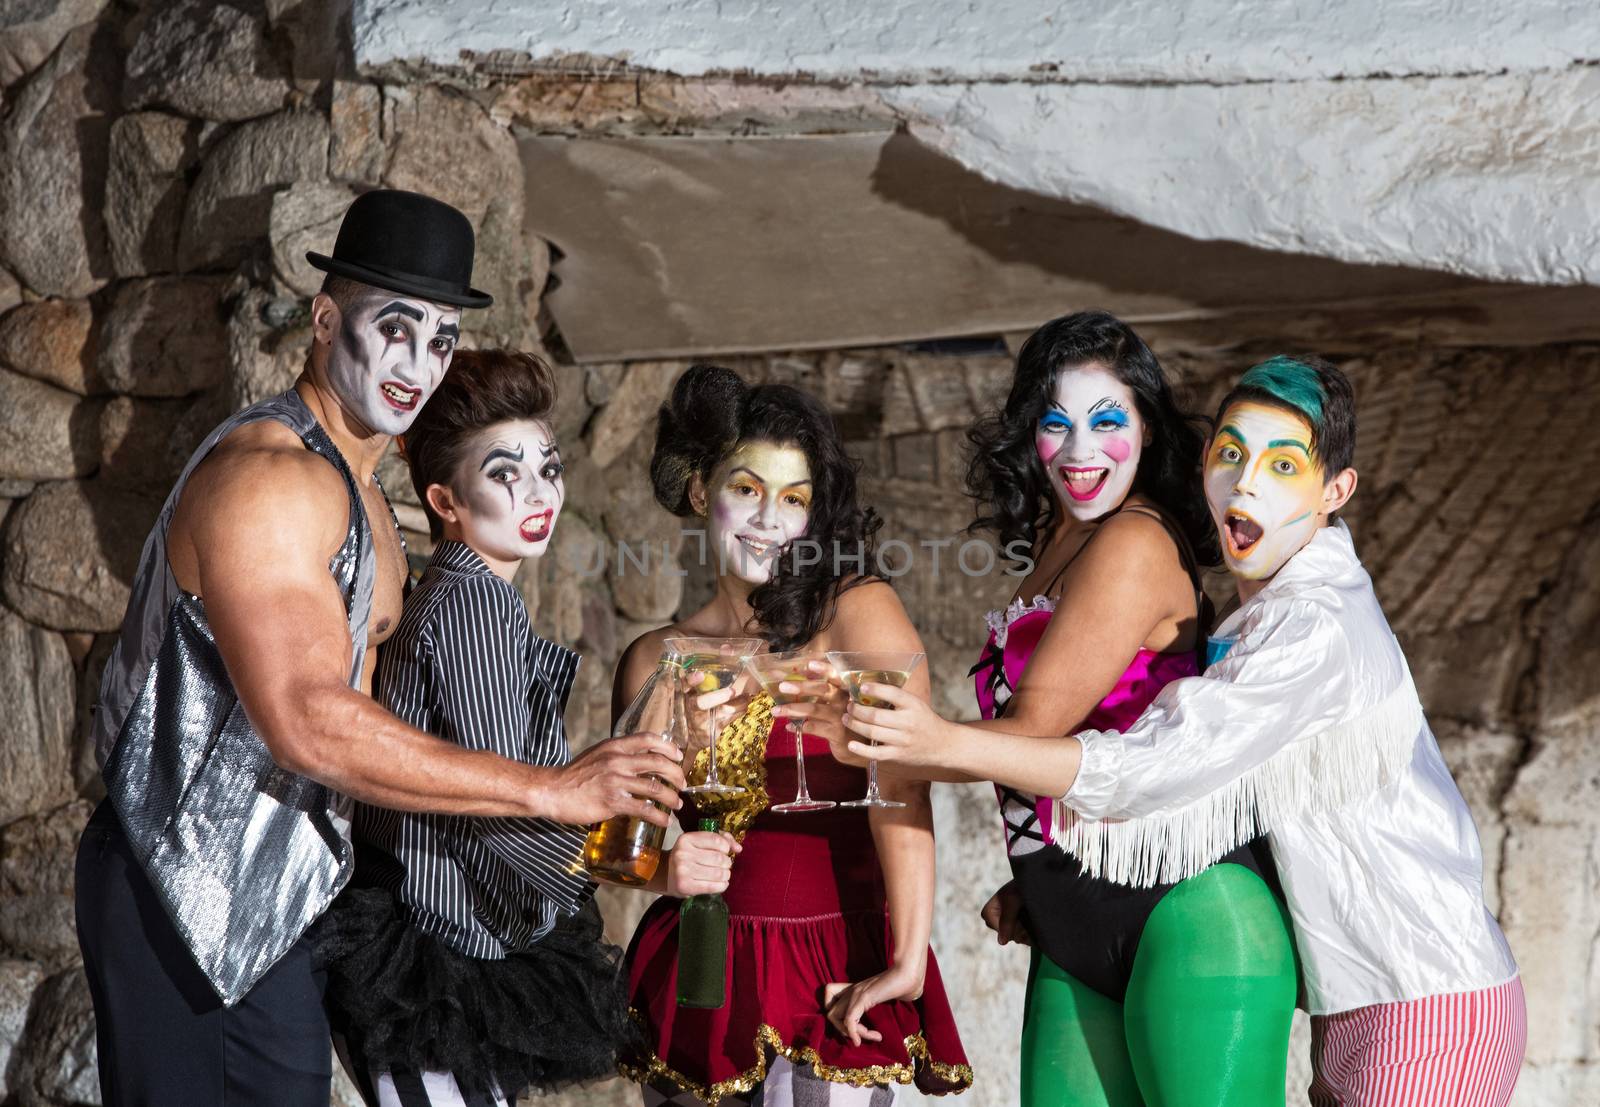 Cirque Clowns with Martinis by Creatista